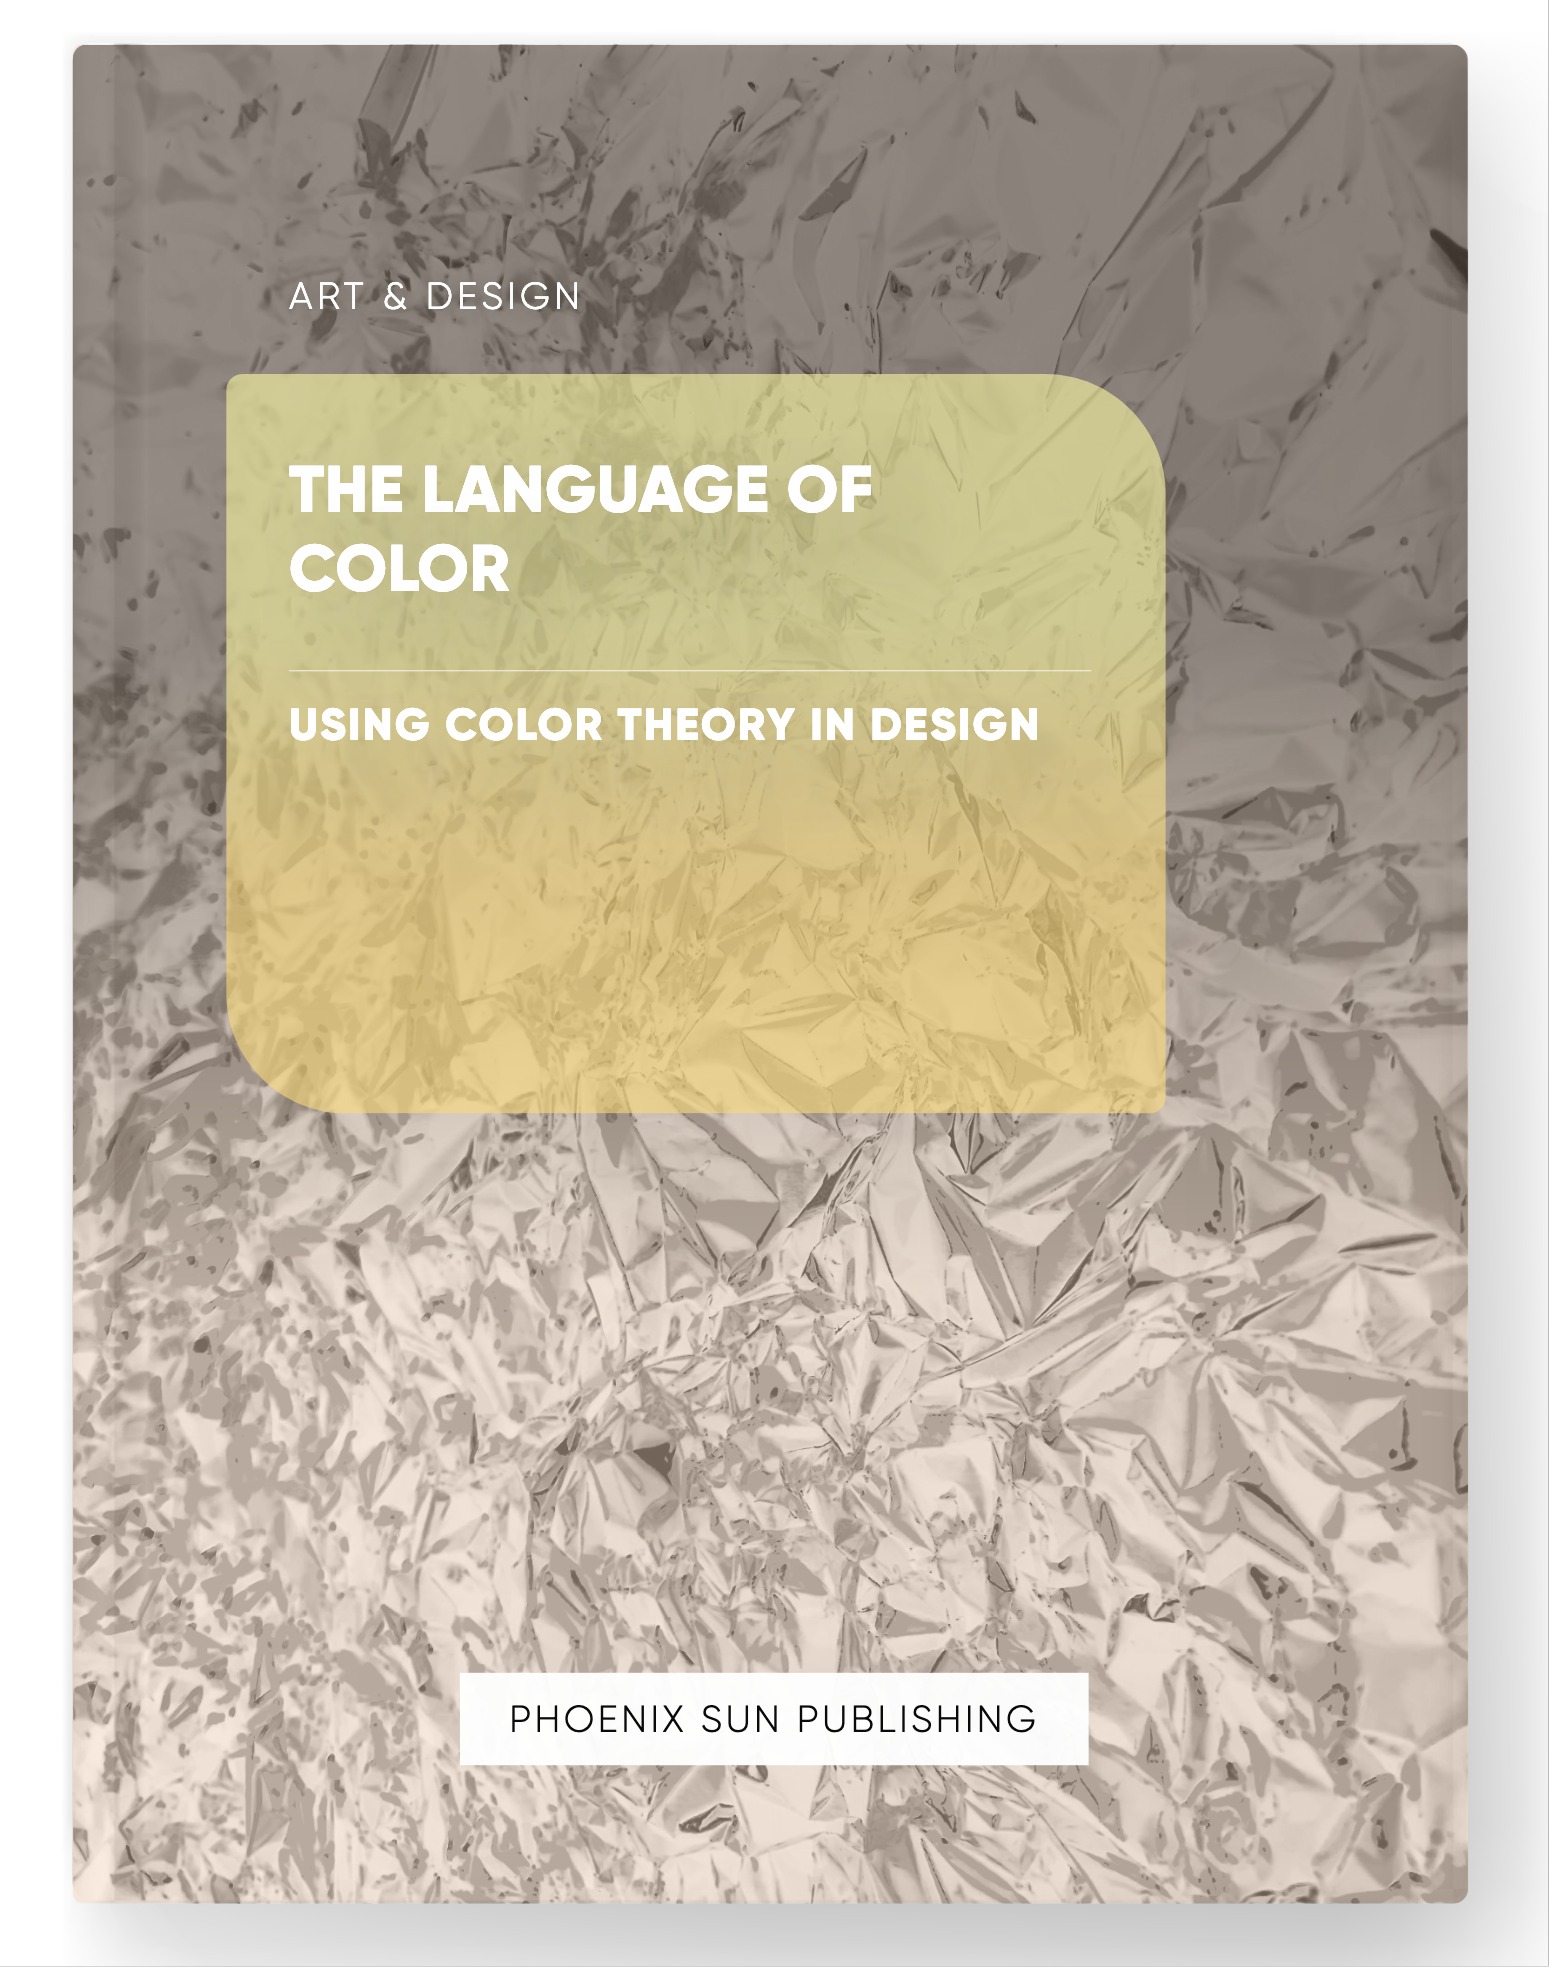 The Language of Color – Using Color Theory in Design